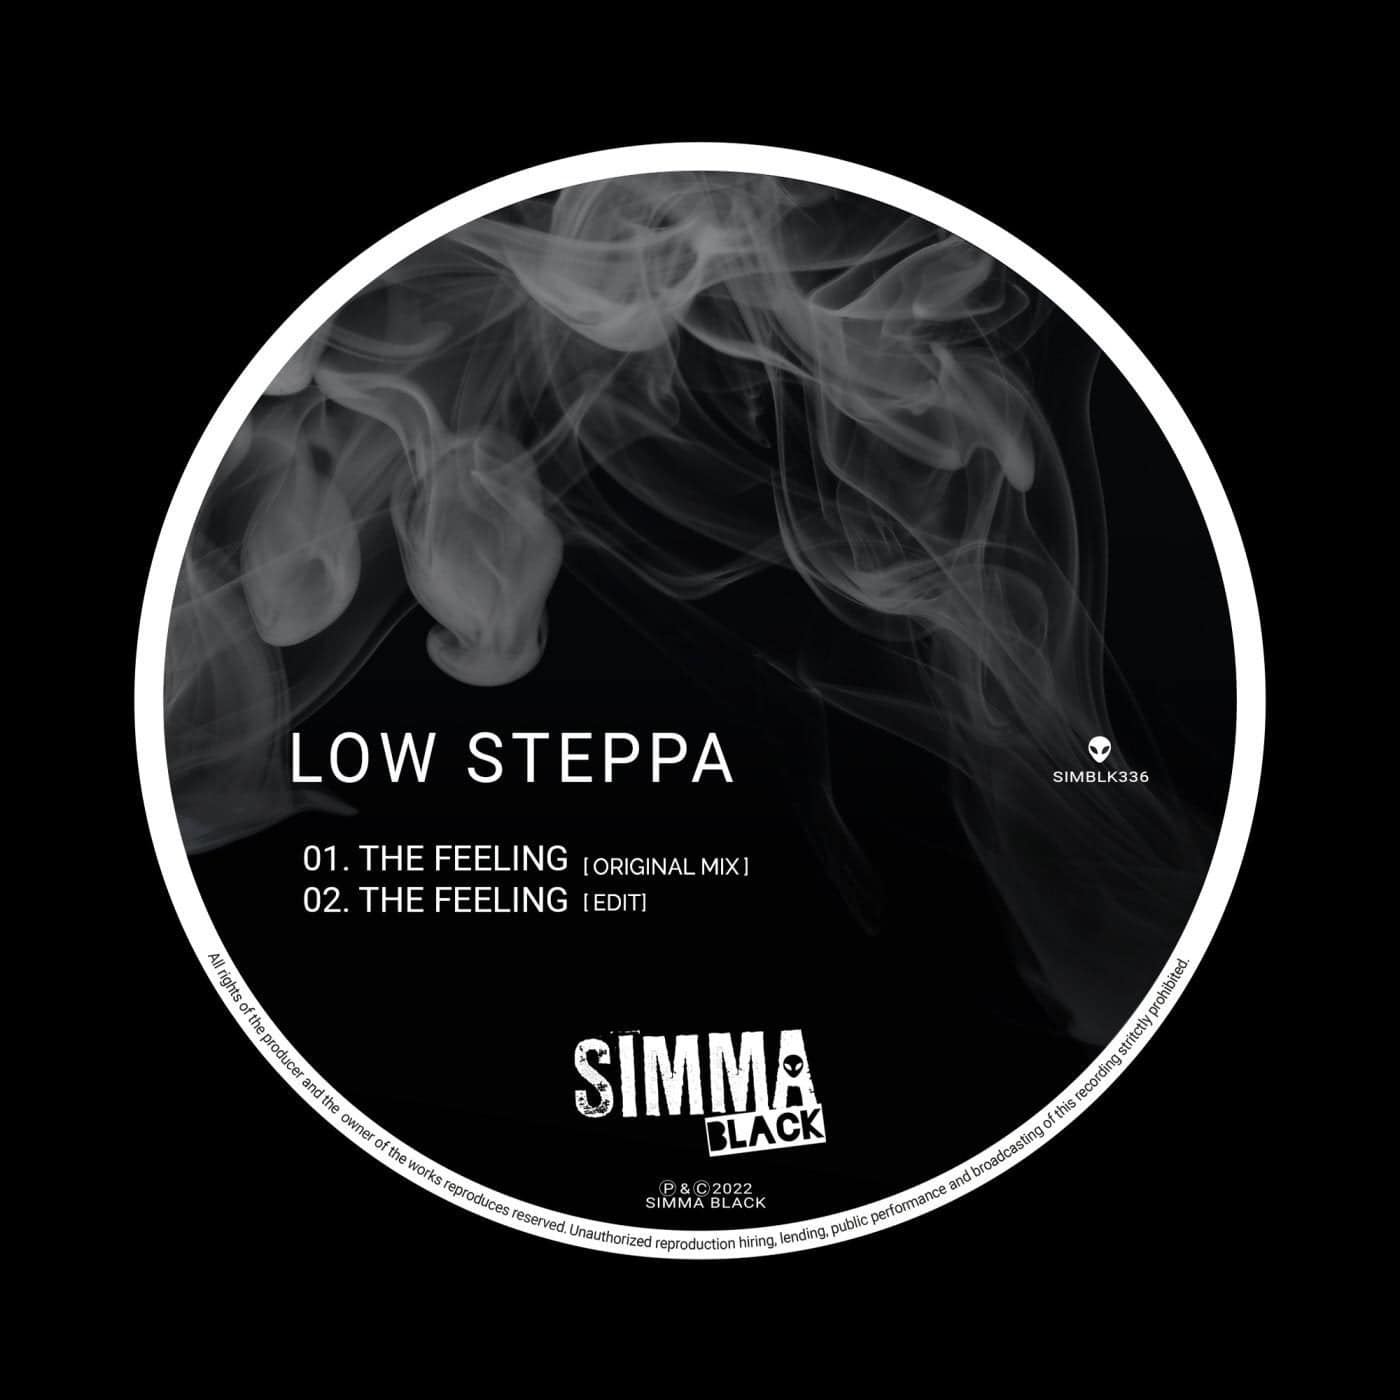 image cover: Low Steppa - The Feeling / SIMBLK336